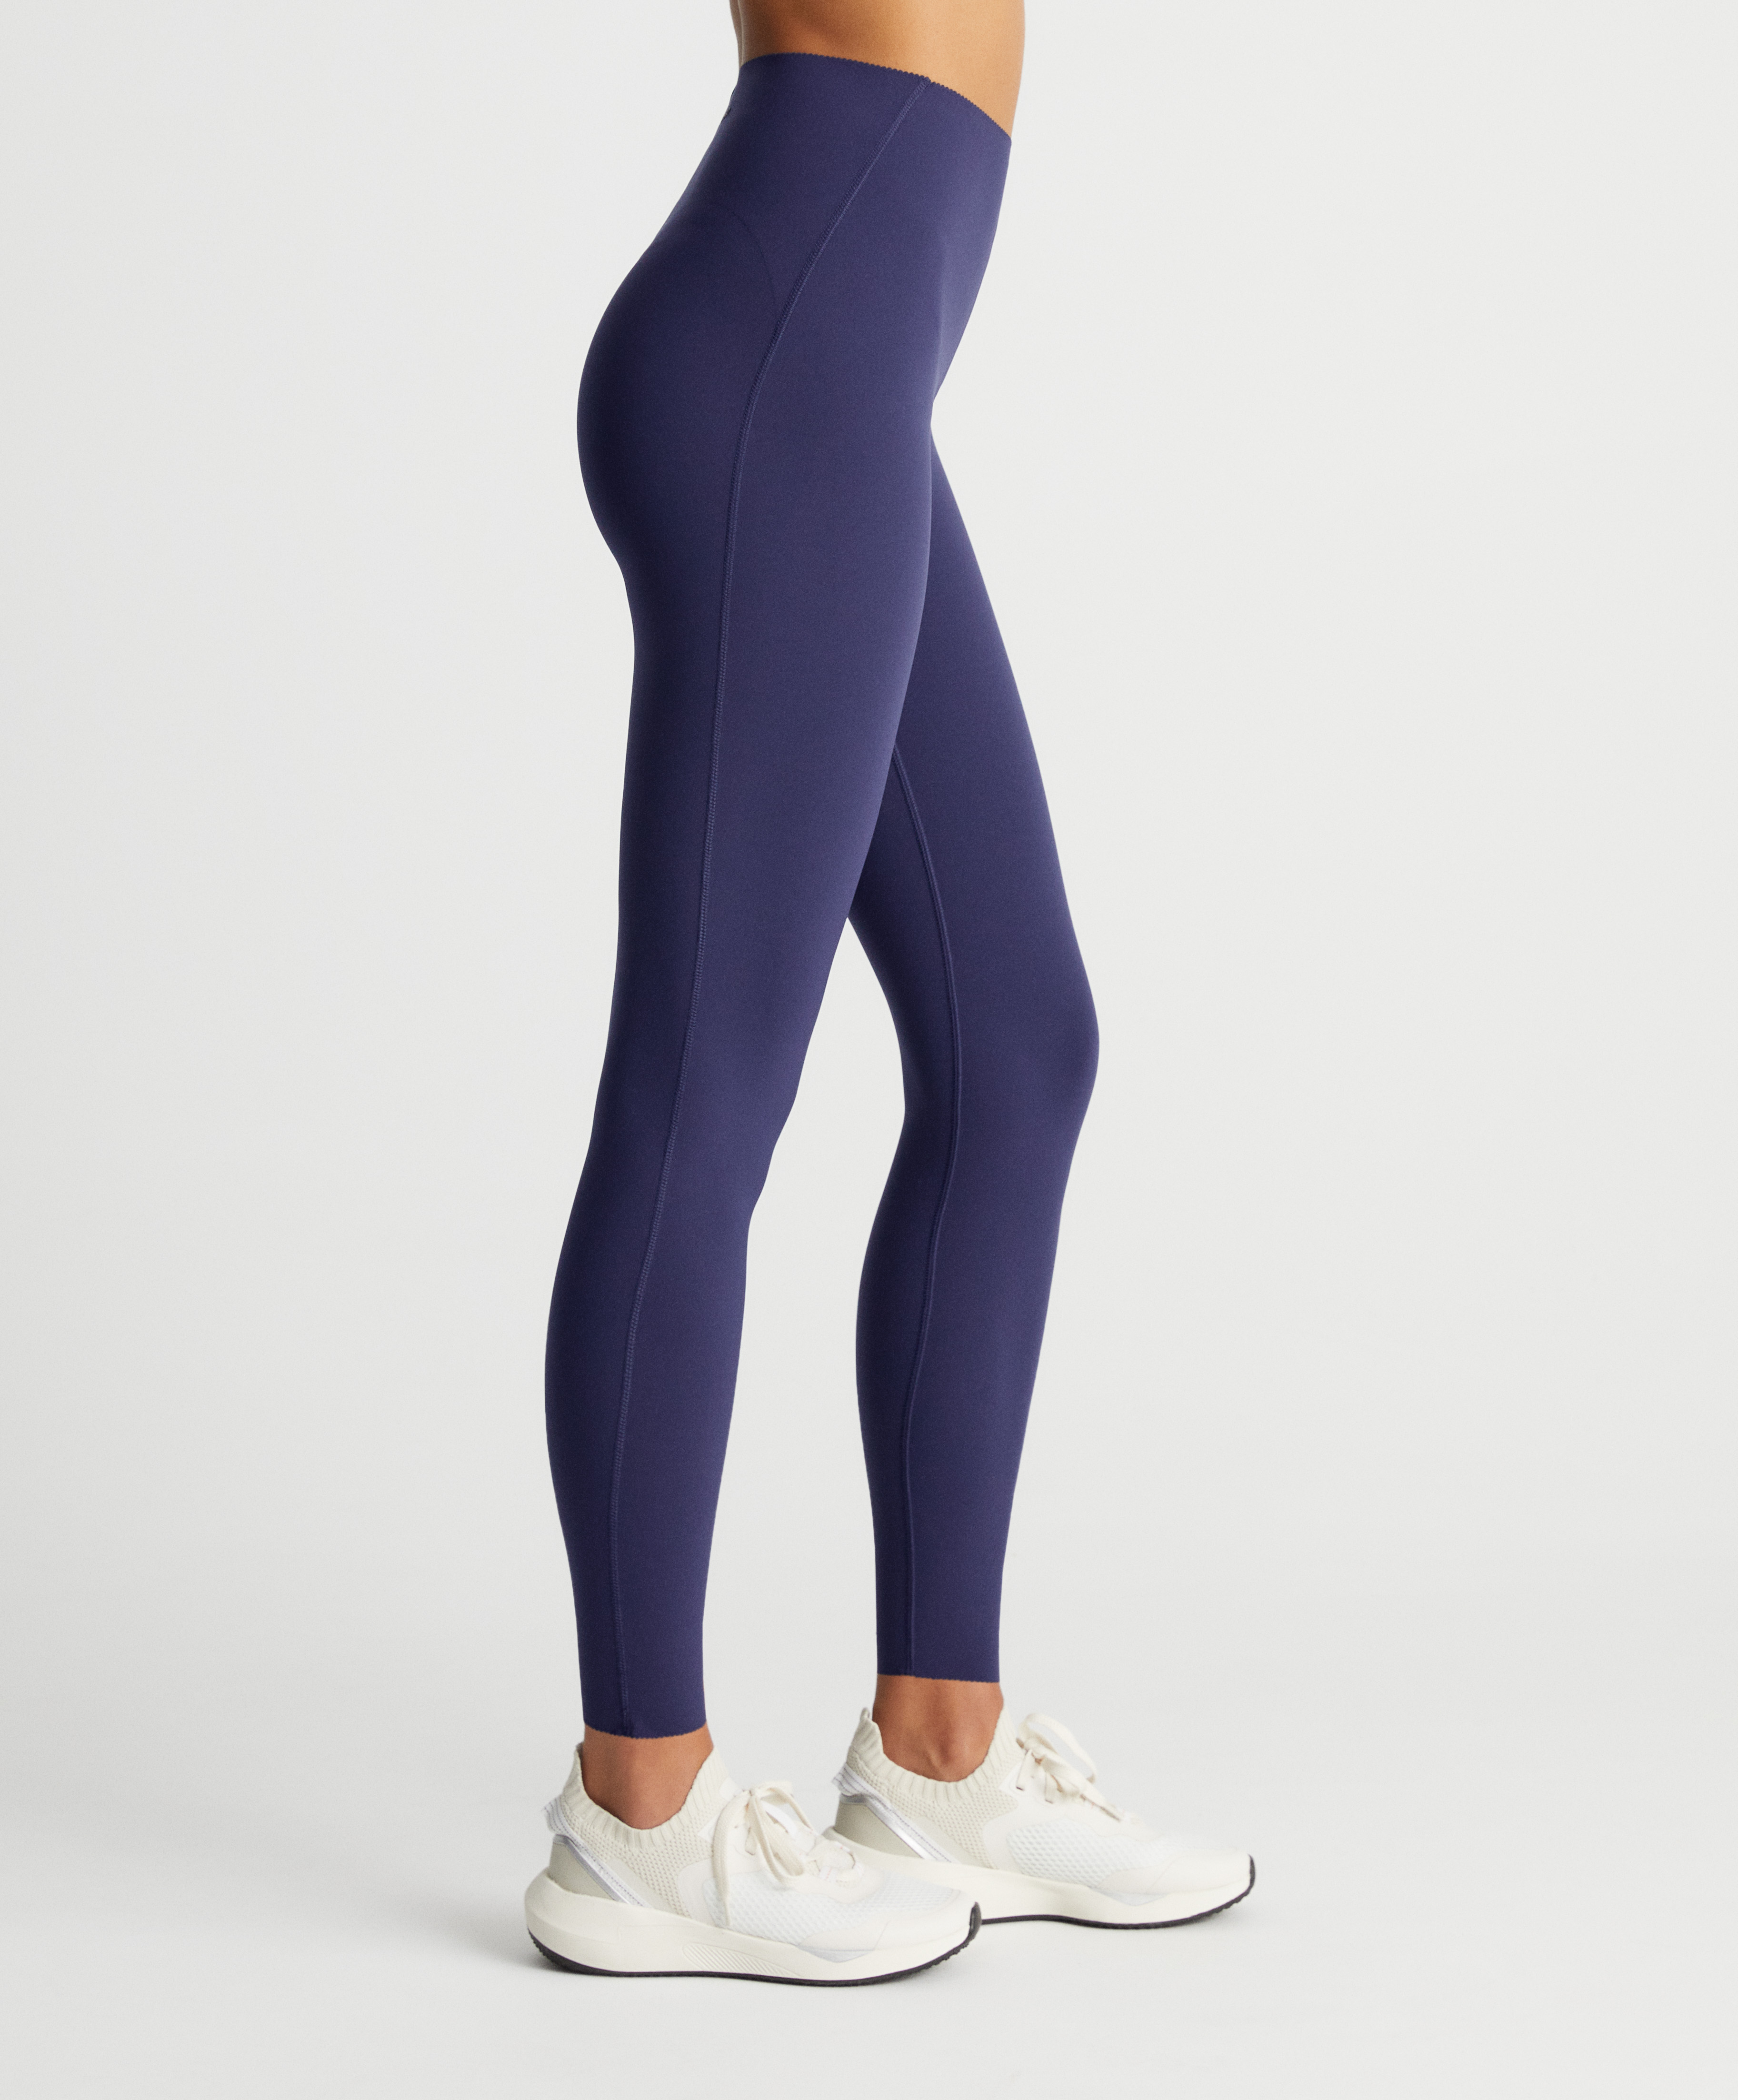 leggings compression - OFF-59% >Free Delivery